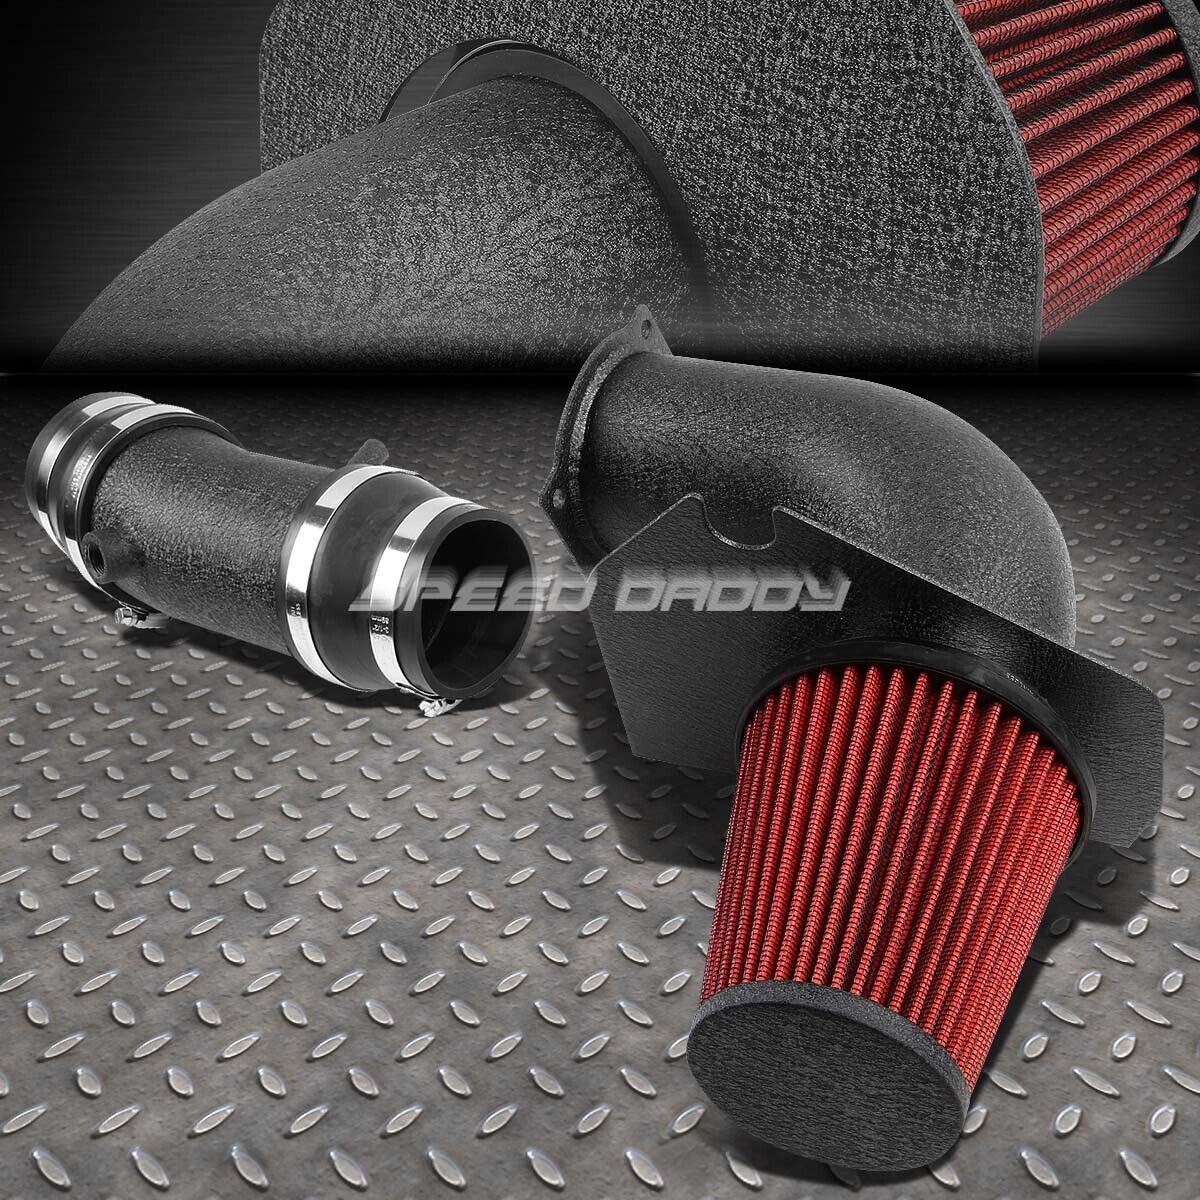 FOR 94-95 MUSTANG GT/SVT 5.0 WRINKLE FINISH ALUMINUM COLD AIR INTAKE+HEAT SHIELD